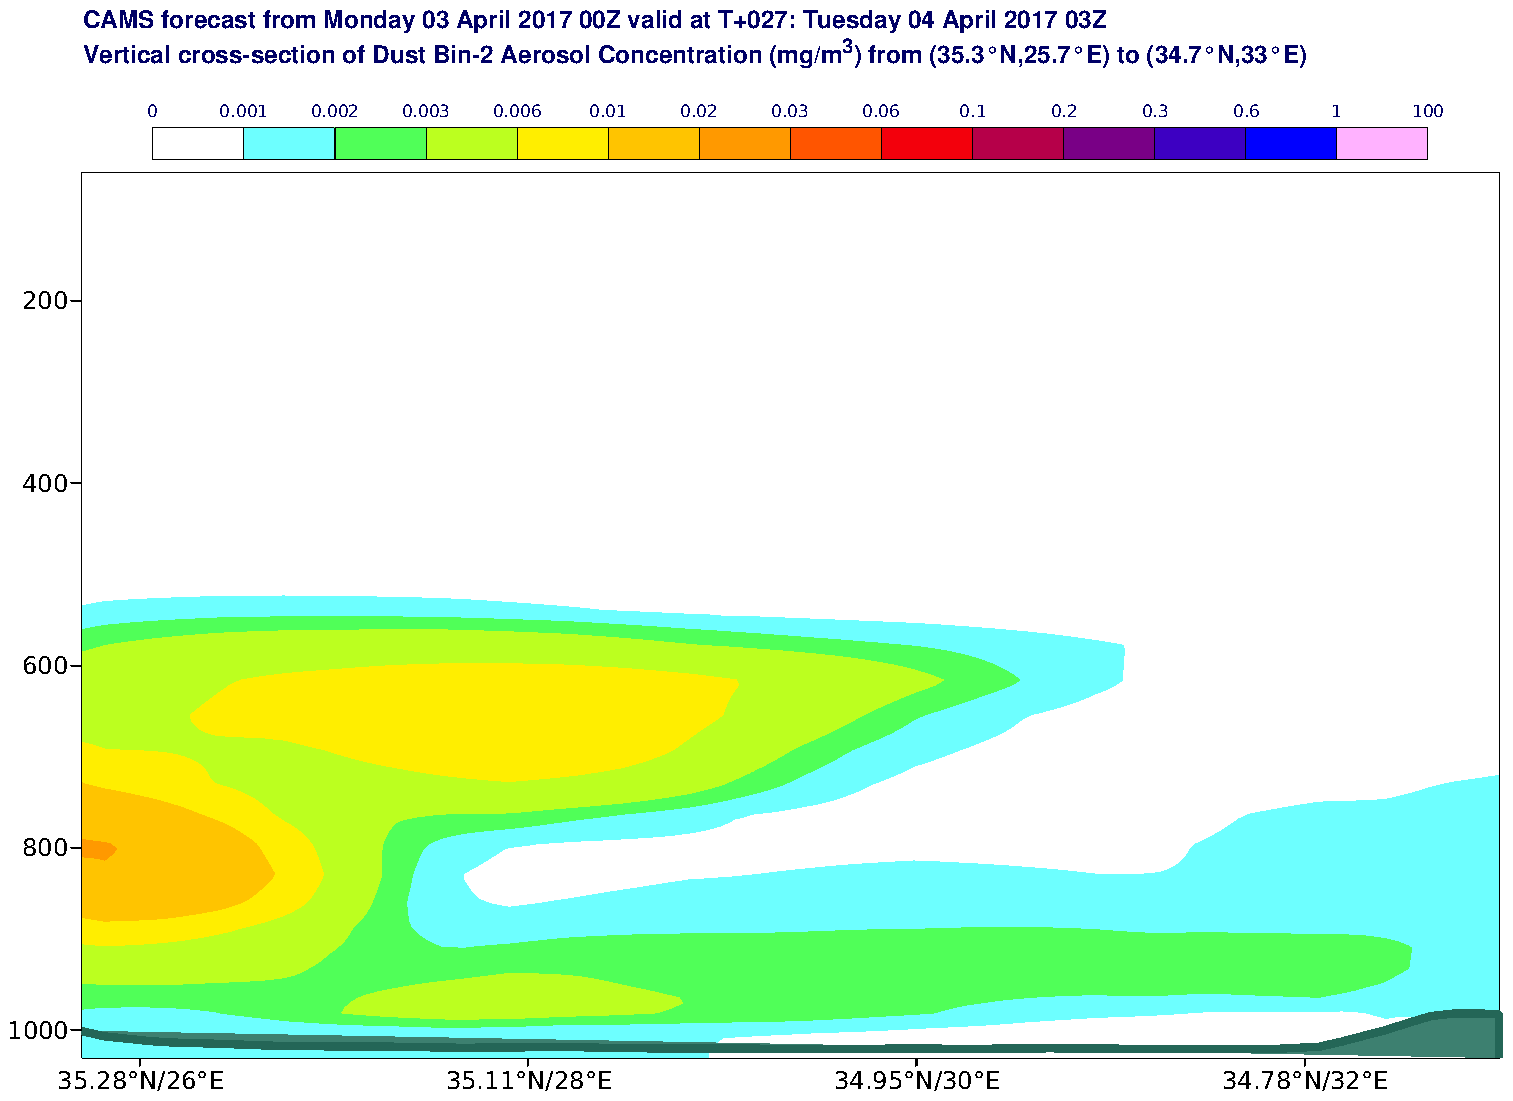 Vertical cross-section of Dust Bin-2 Aerosol Concentration (mg/m3) valid at T27 - 2017-04-04 03:00